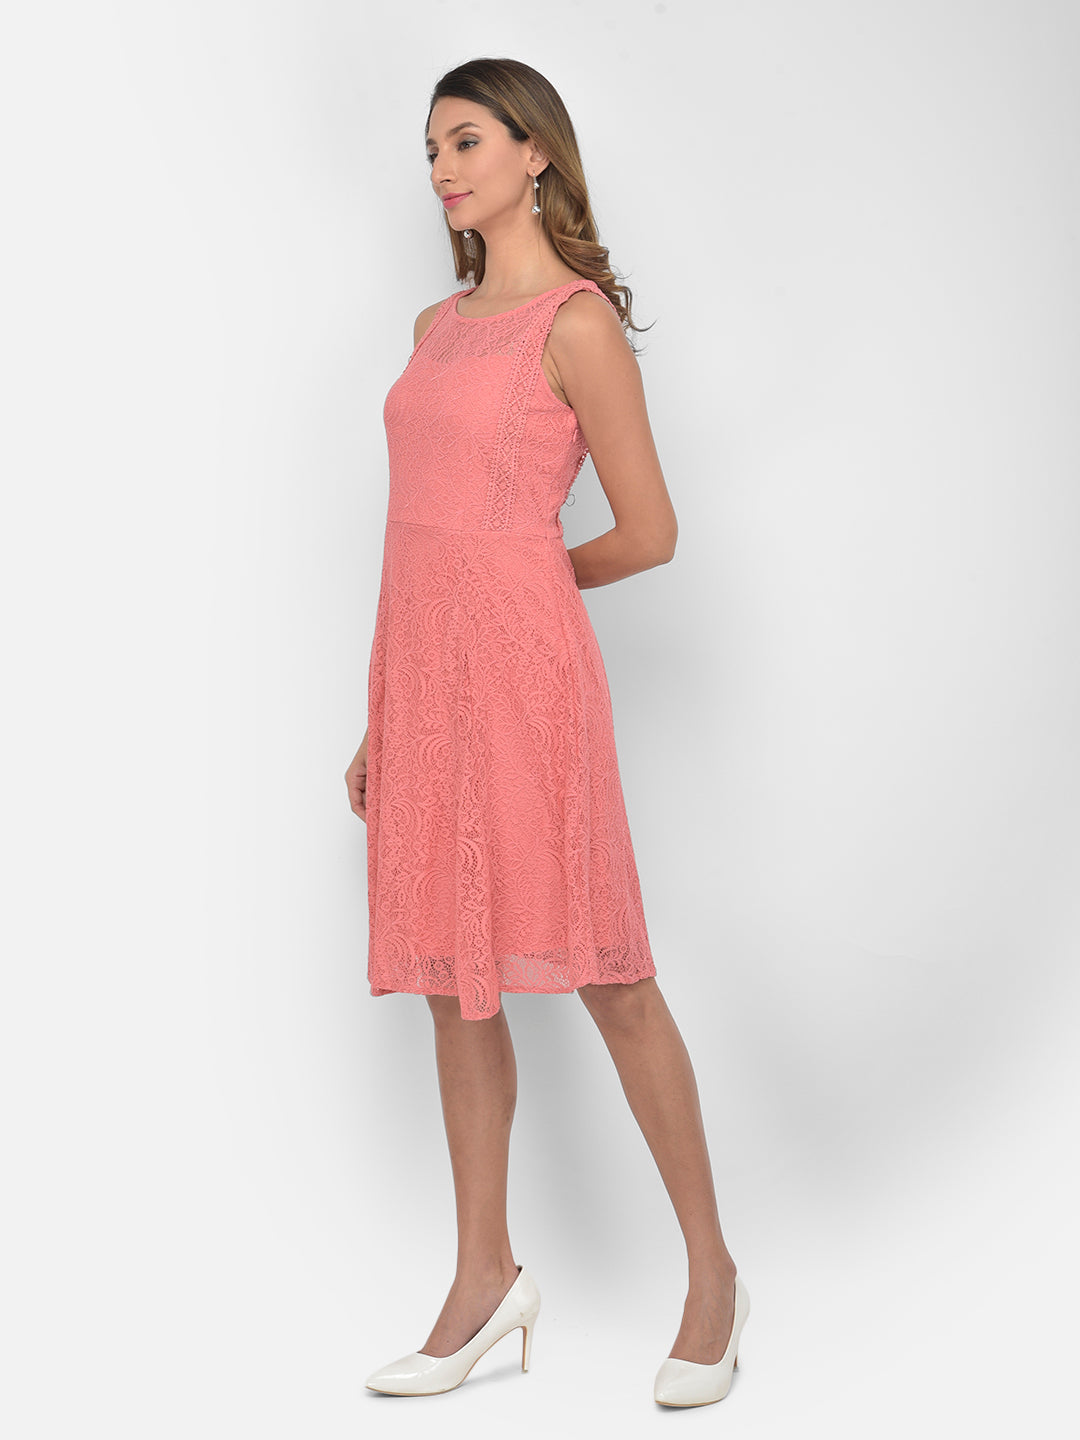 Pink Sleeveless A-Line Dress With Lace